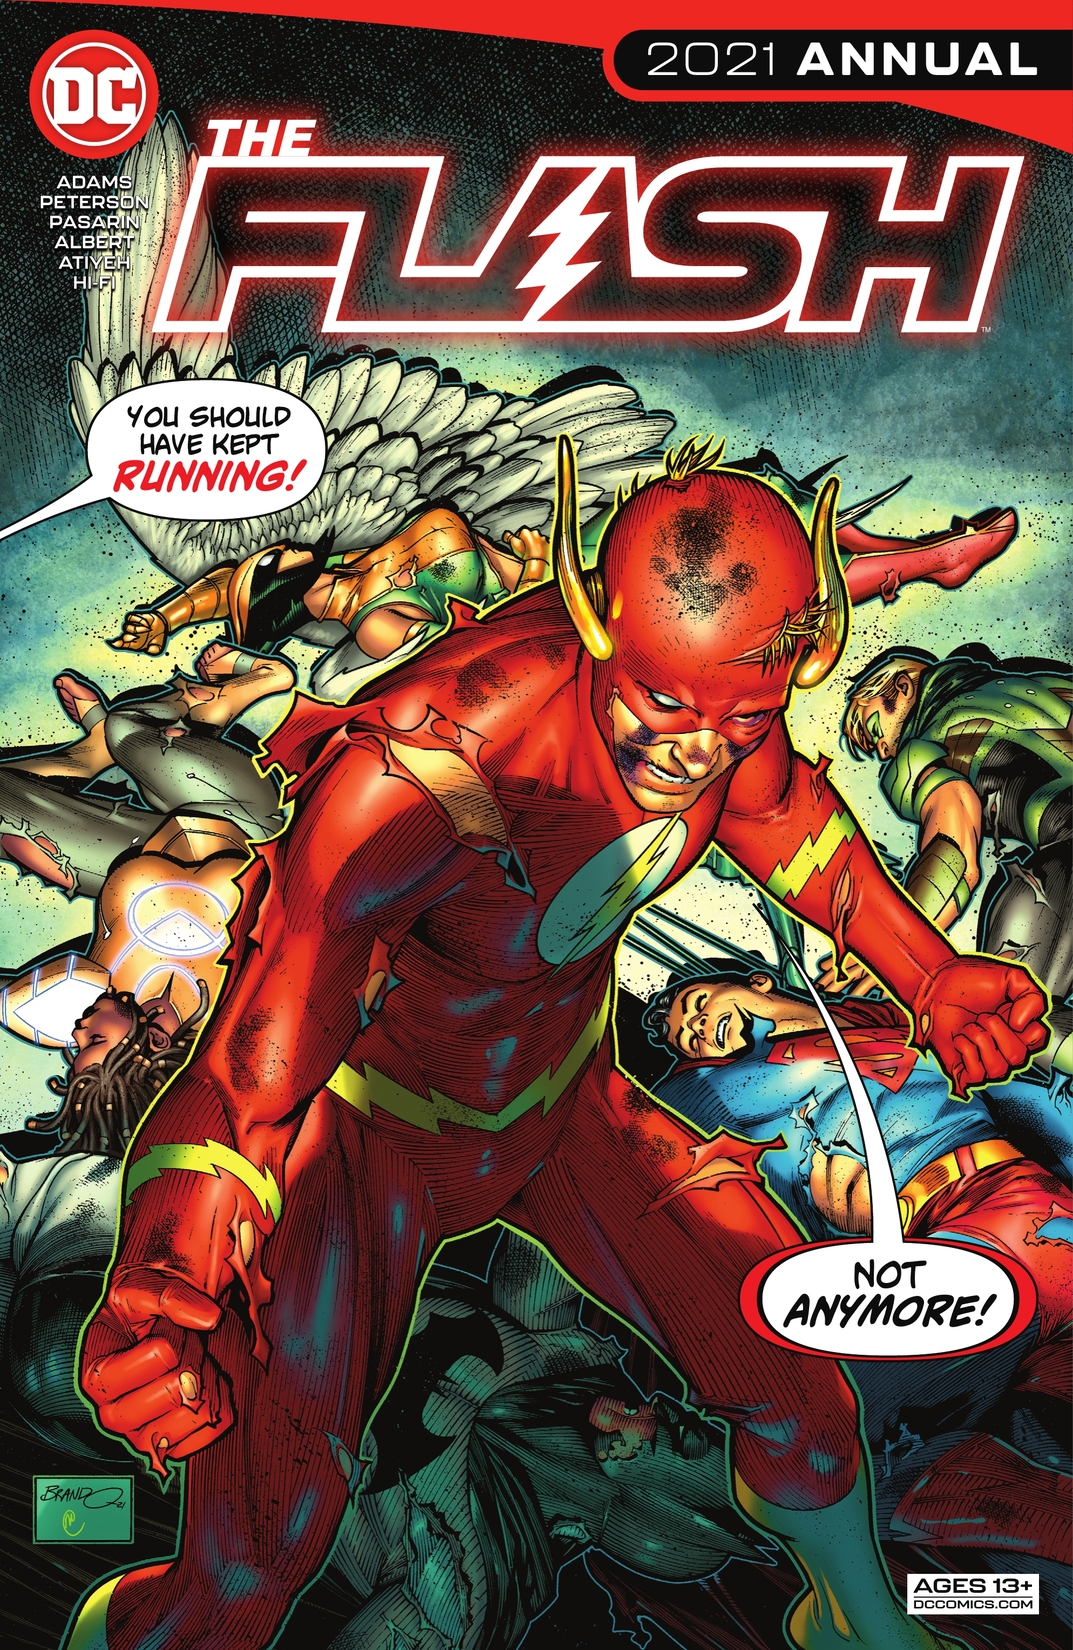 The Flash 2021 Annual (2021) #1 preview images